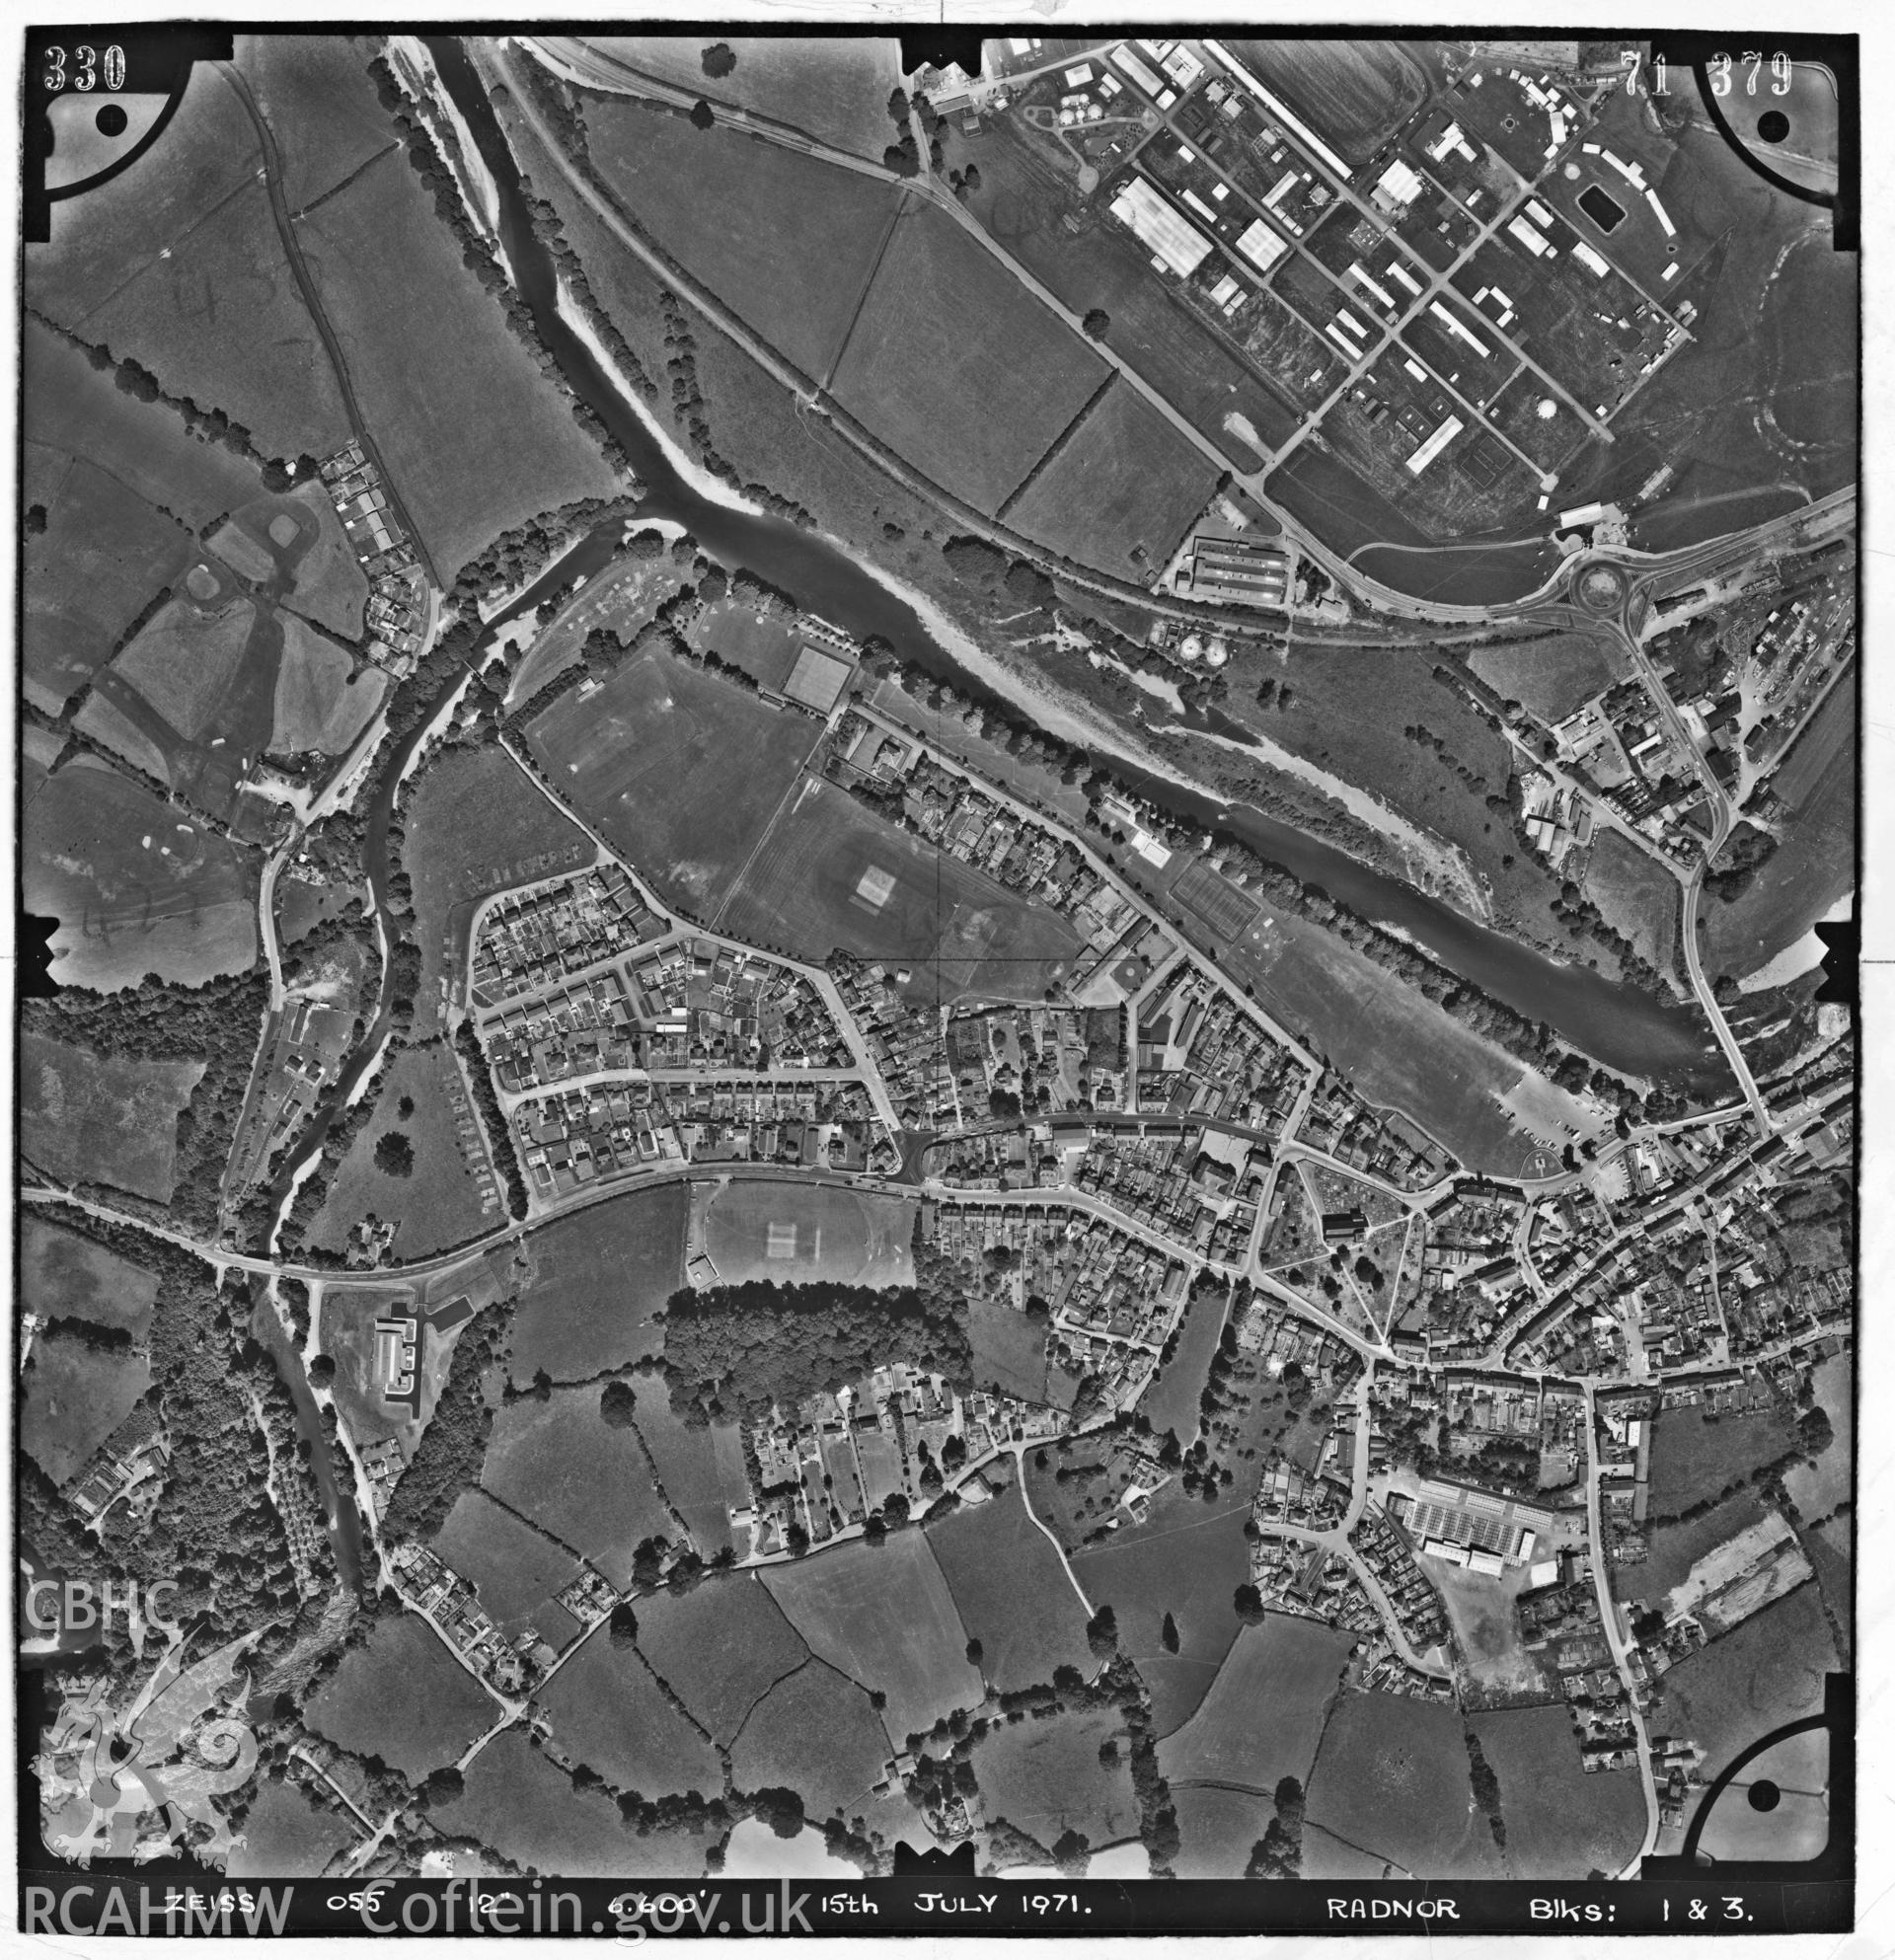 Digitized copy of an aerial photograph showing the area around Builth Wells, taken by Ordnance Survey, 1971.